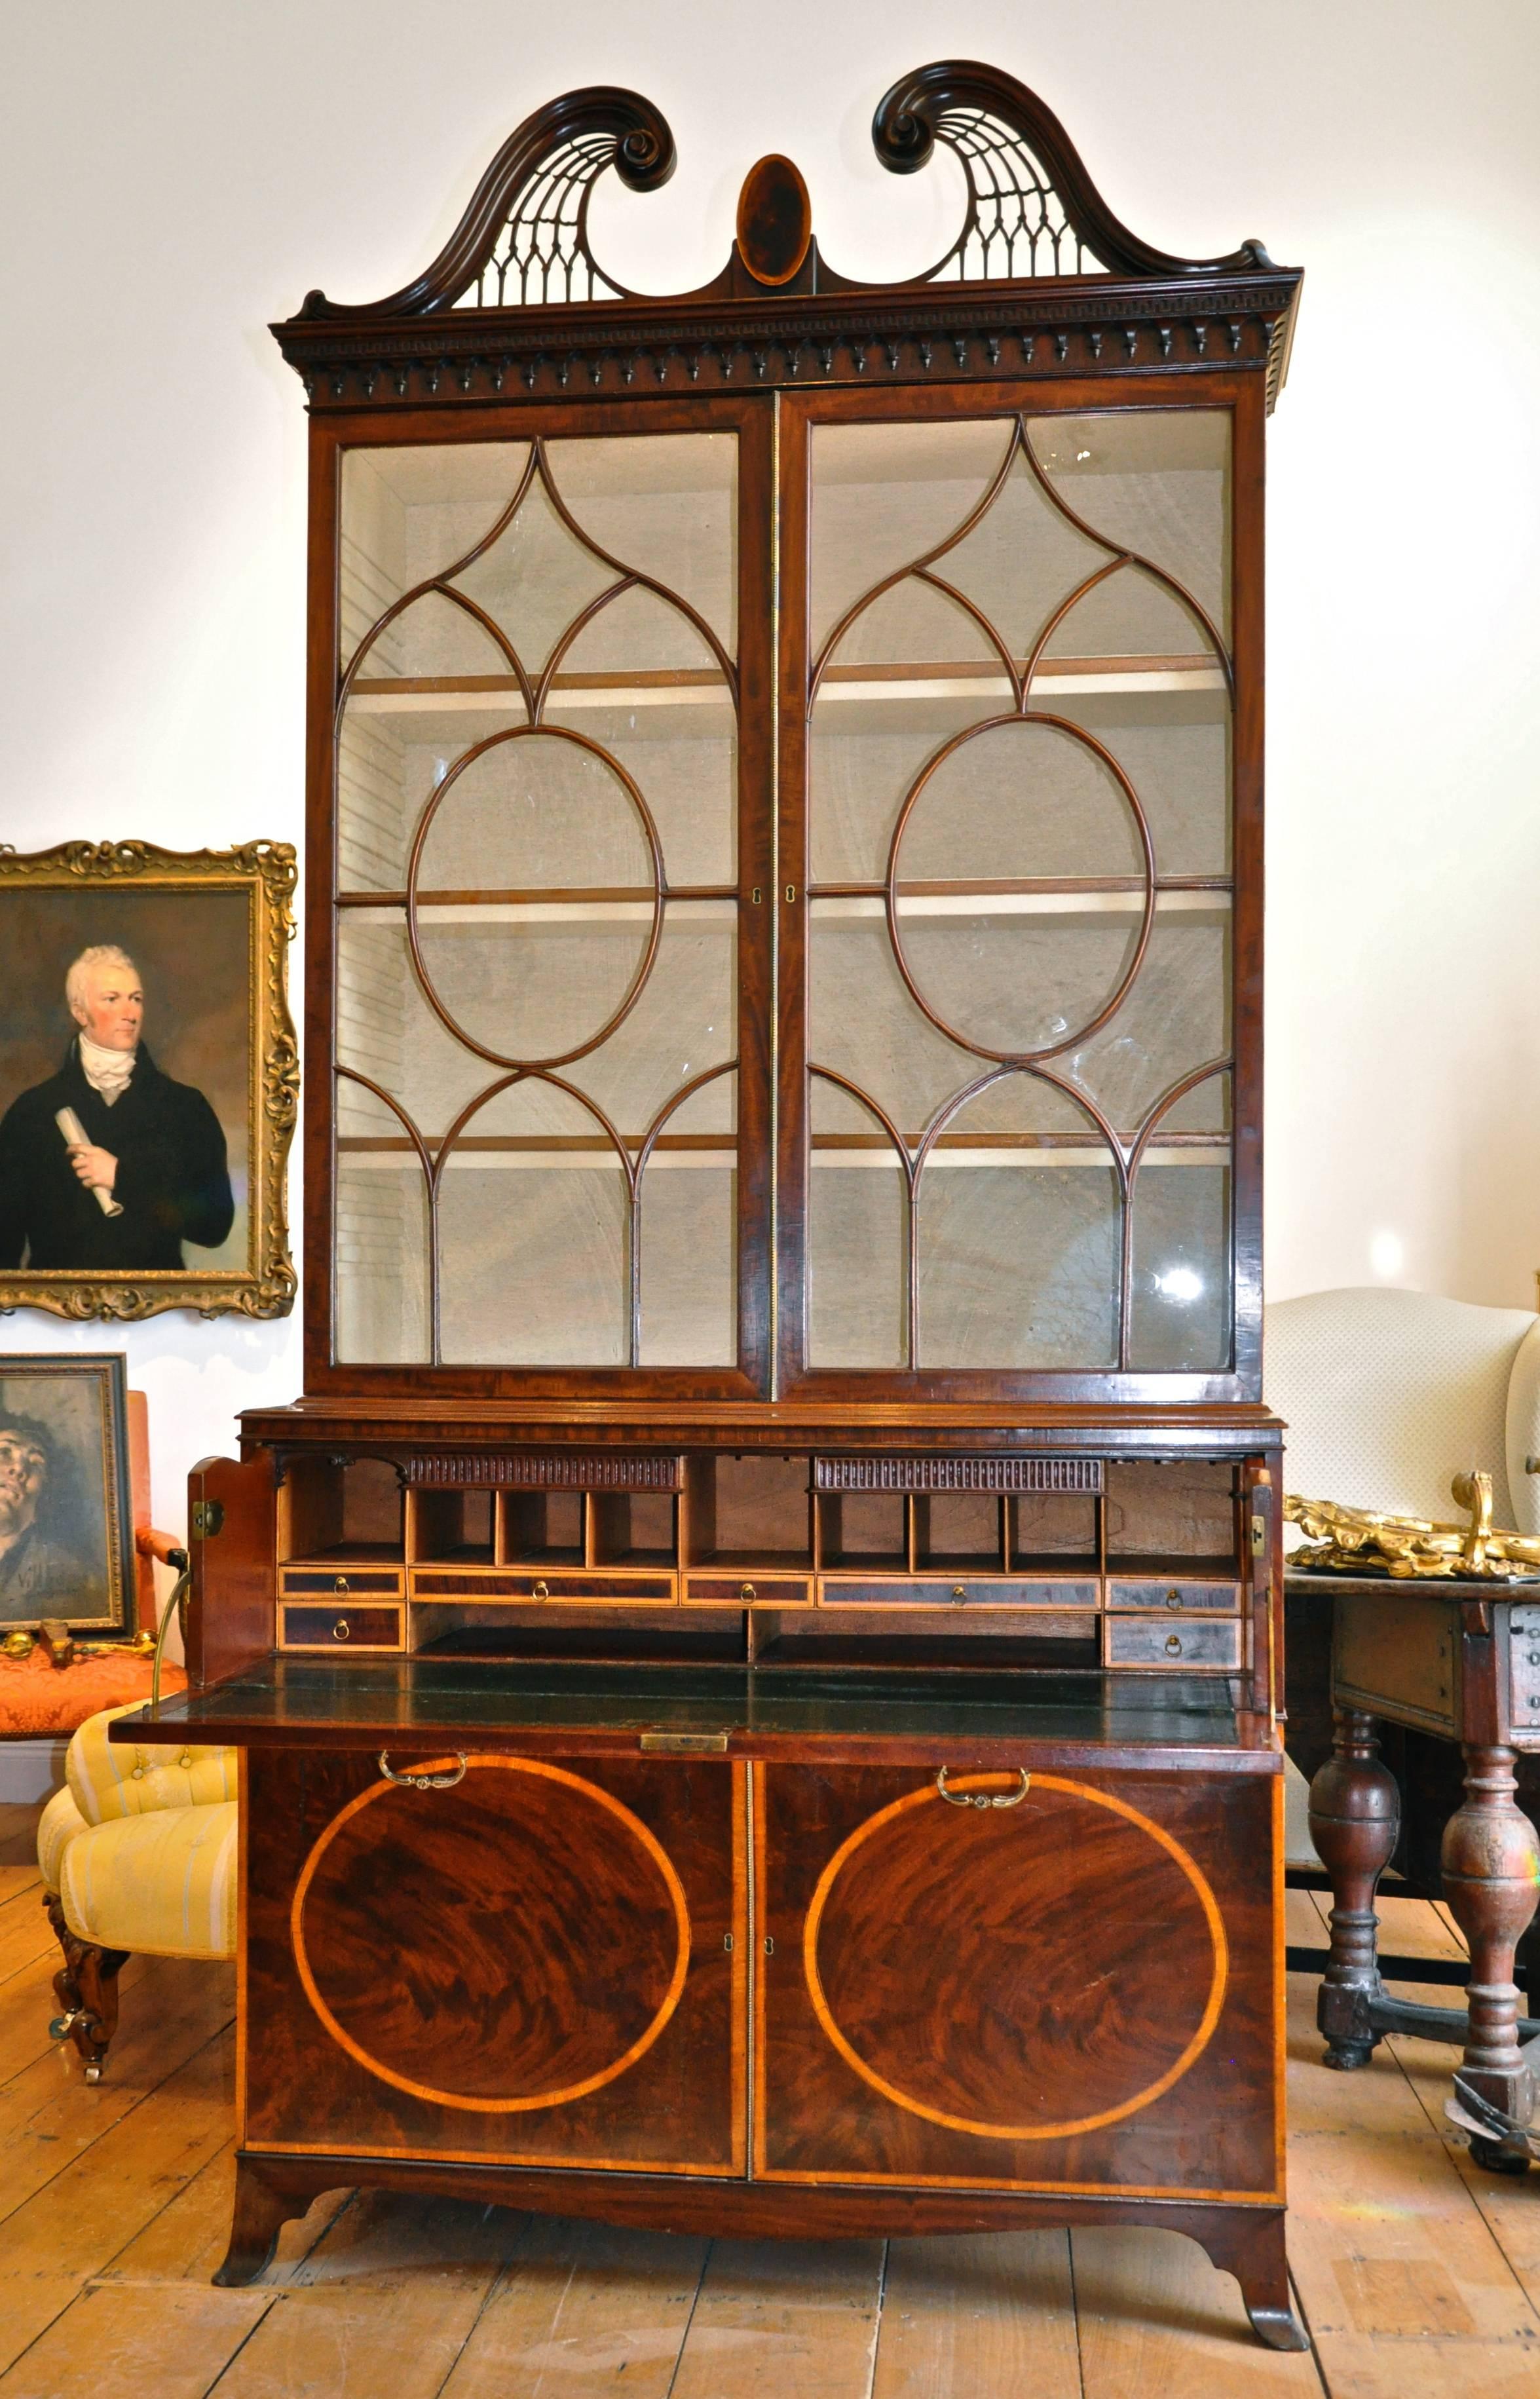 Period George III or early Regency mahogany and satinwood Hepplewhite
secretary bookcase.

Magnificent crotch mahogany wood banded in satinwood. Top cornice and pediment in reticulated broken arch. Fenestrations in neoclassical late Georgian